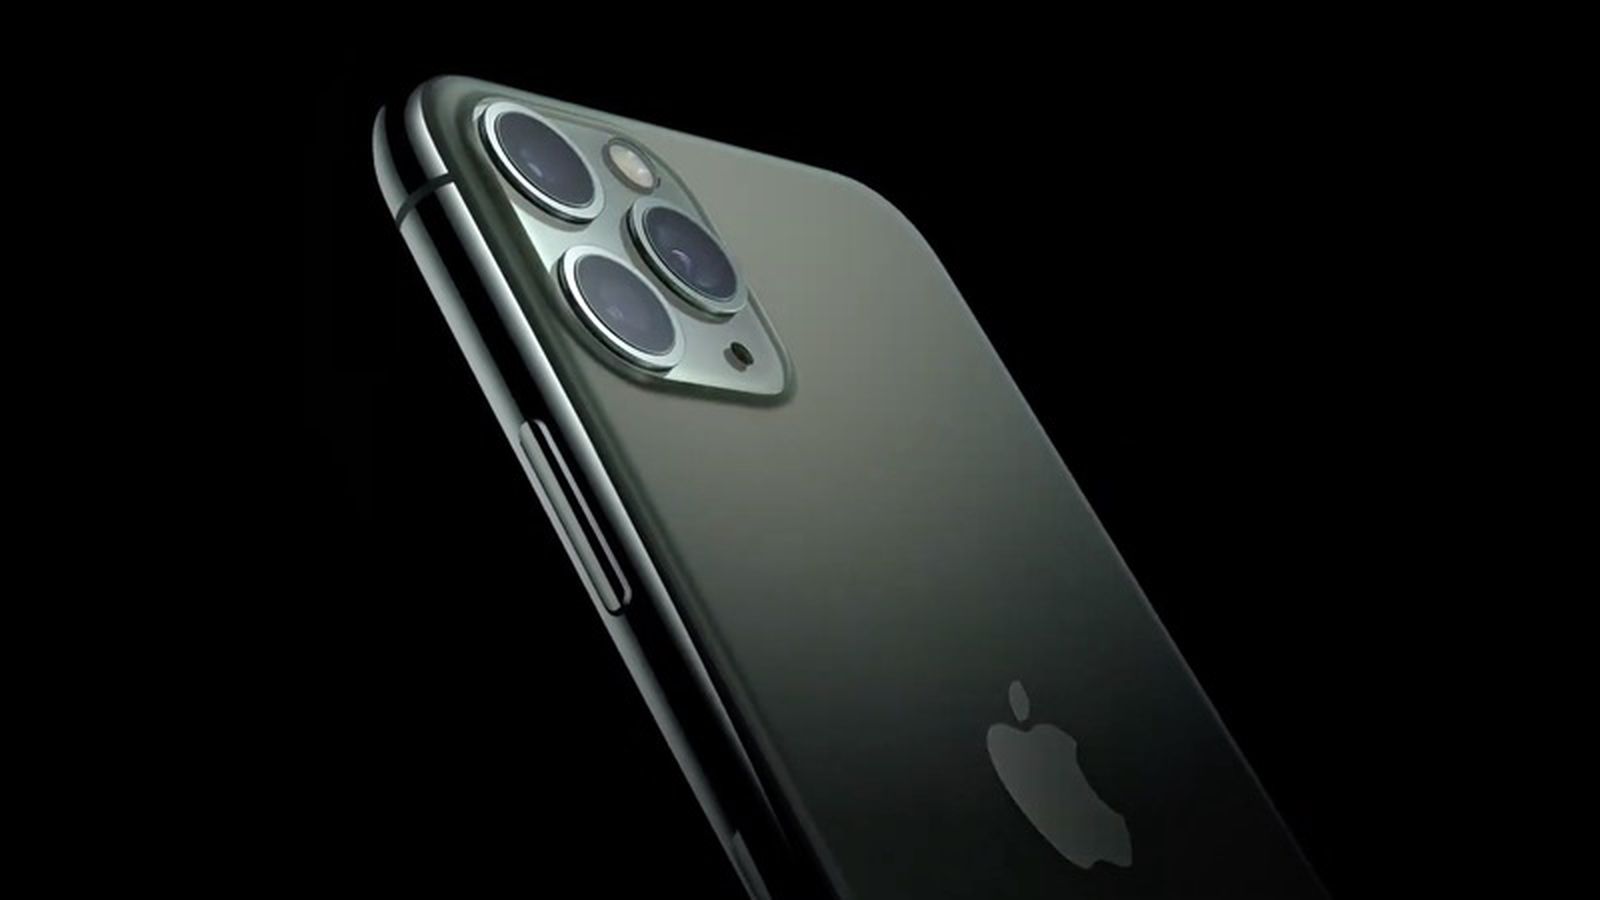 Apple Announces Iphone 11 Pro And Iphone 11 Pro Max With Triple Lens Rear Camera And Midnight Green Color Macrumors